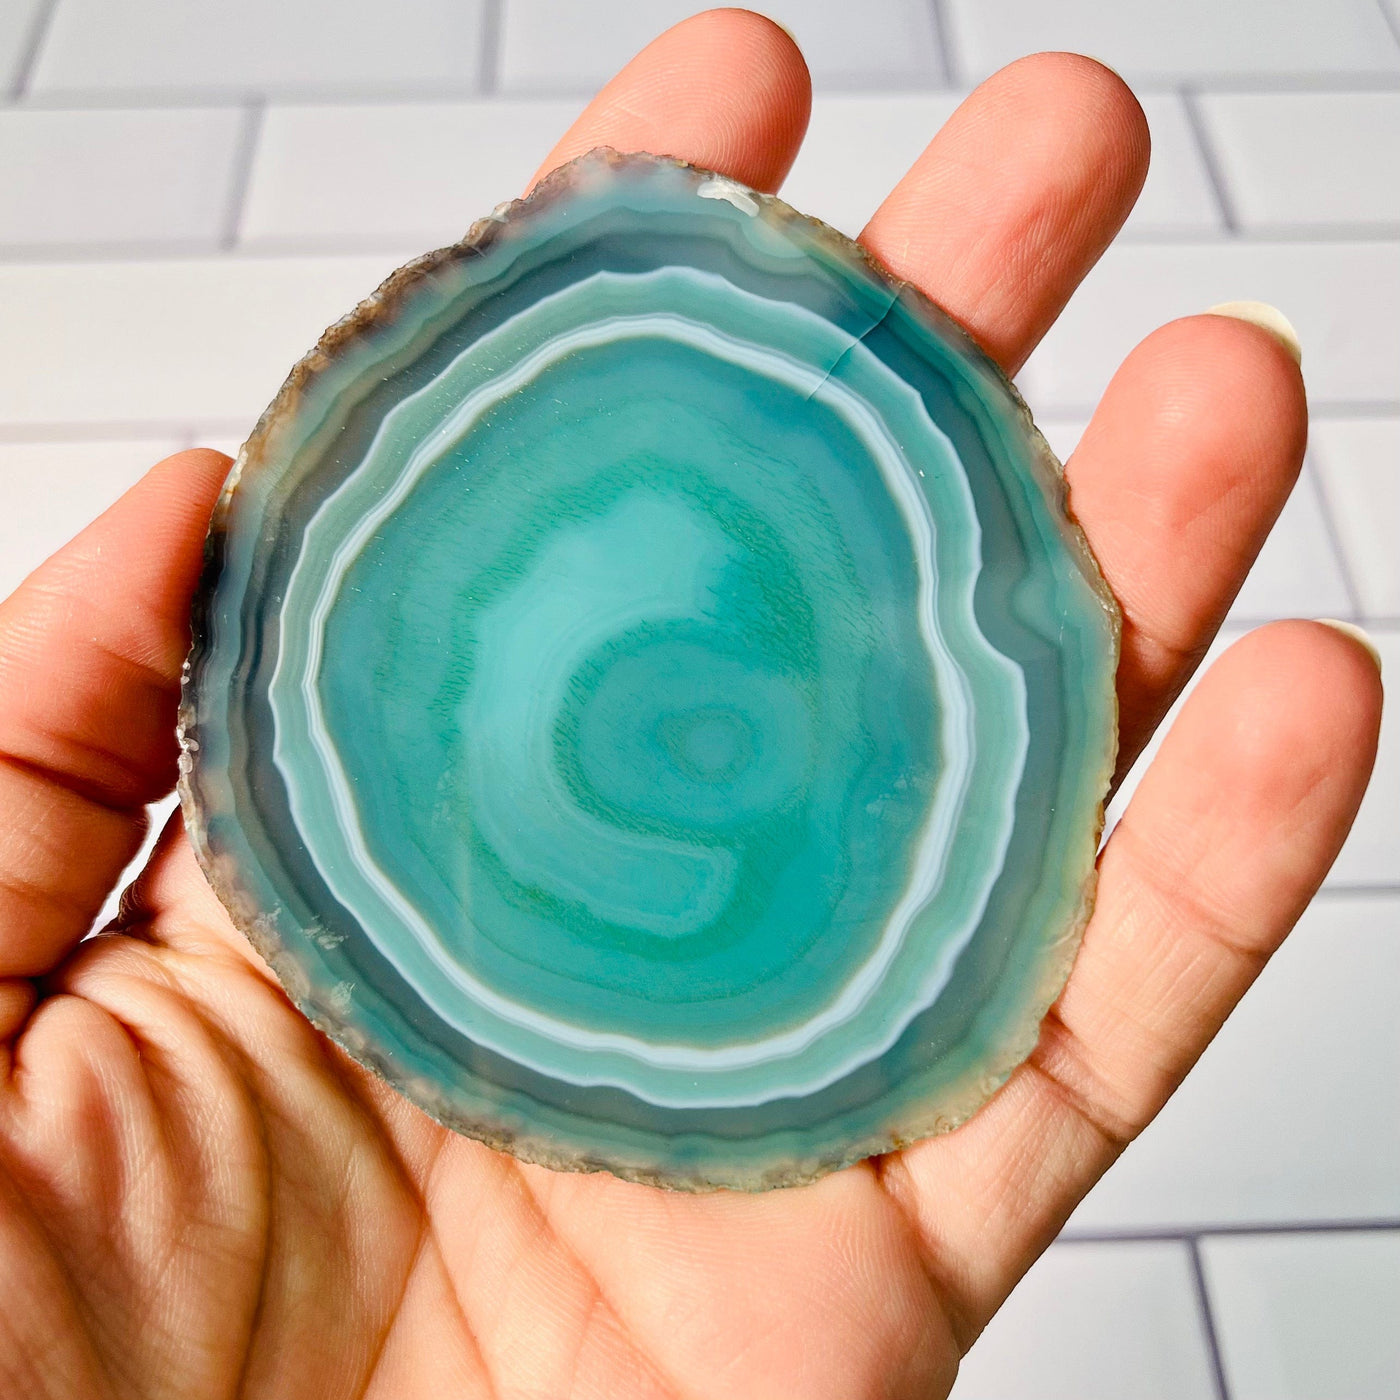 Back view of smallest Agate Slice, green color and held in a woman's hand.